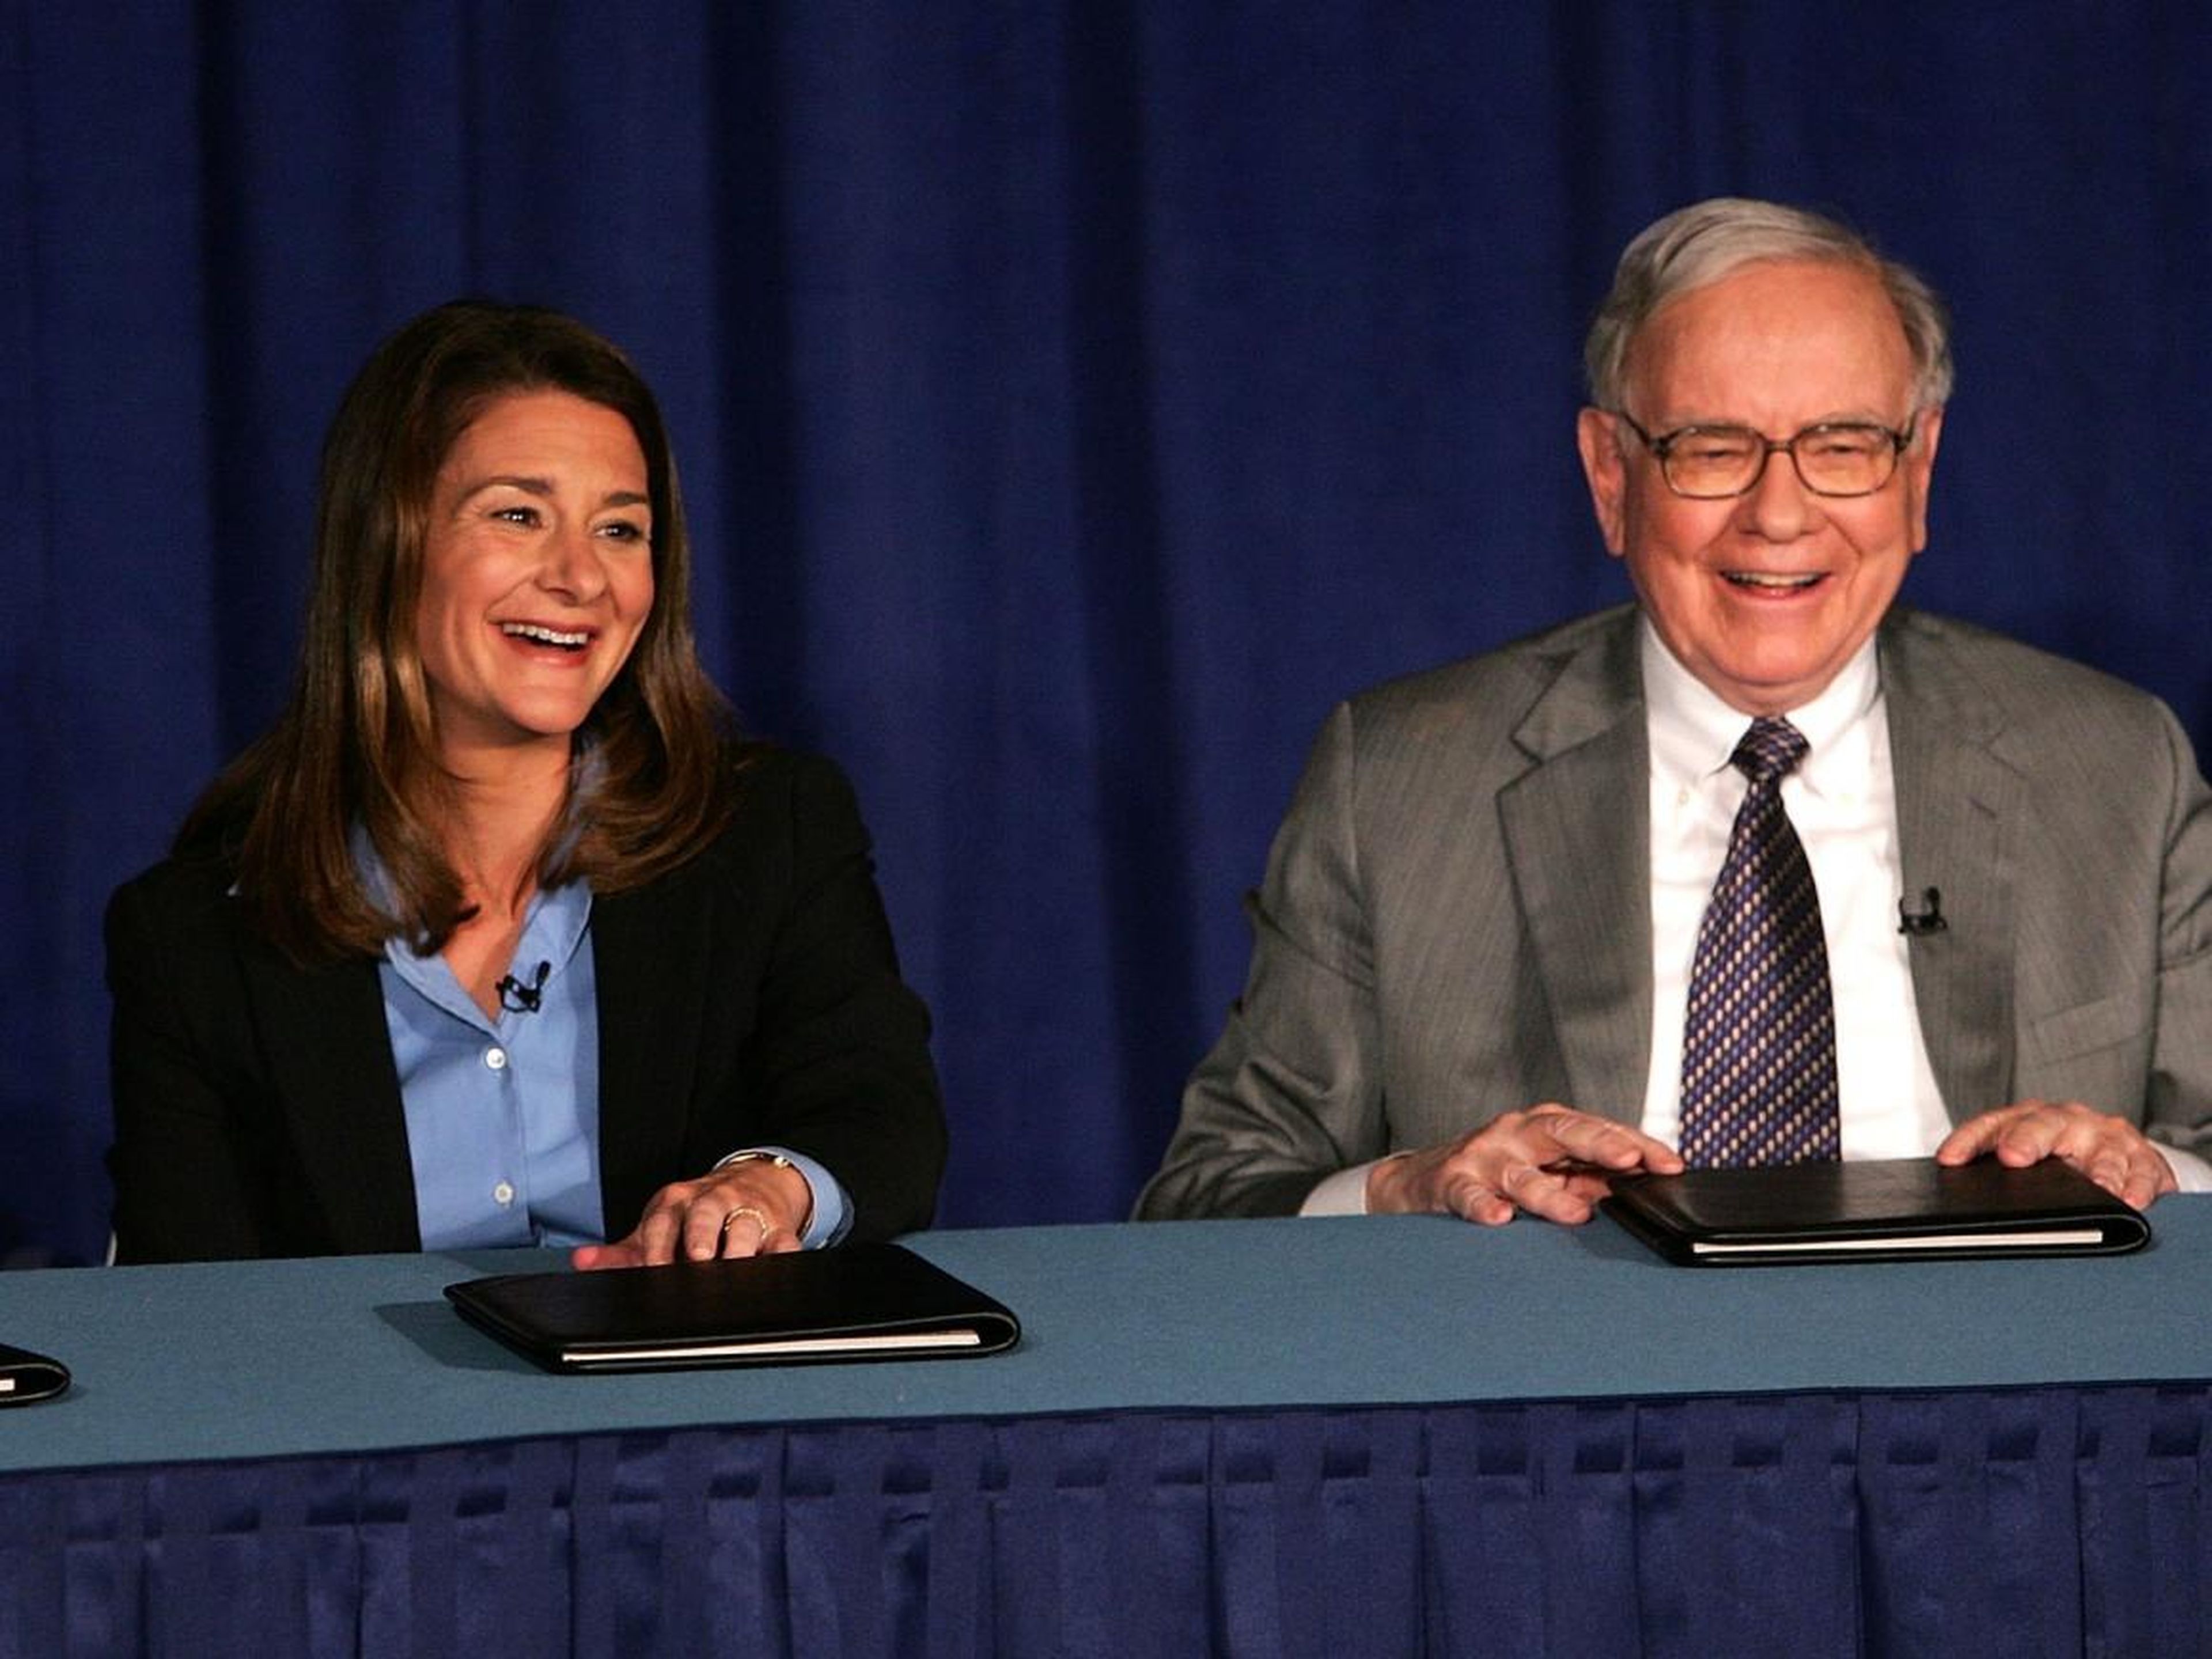 In a Reddit AMA, Gates disclosed that his wife and Buffett were his two favorite celebrities...